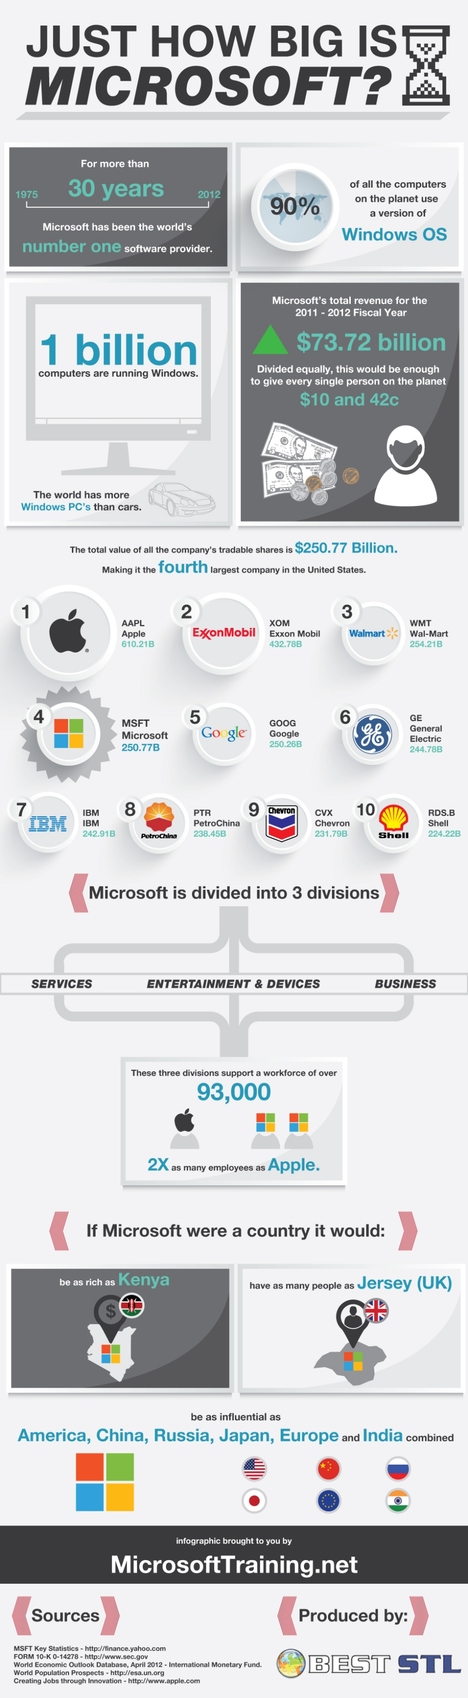 Just How Big Is Microsoft? (infographic)